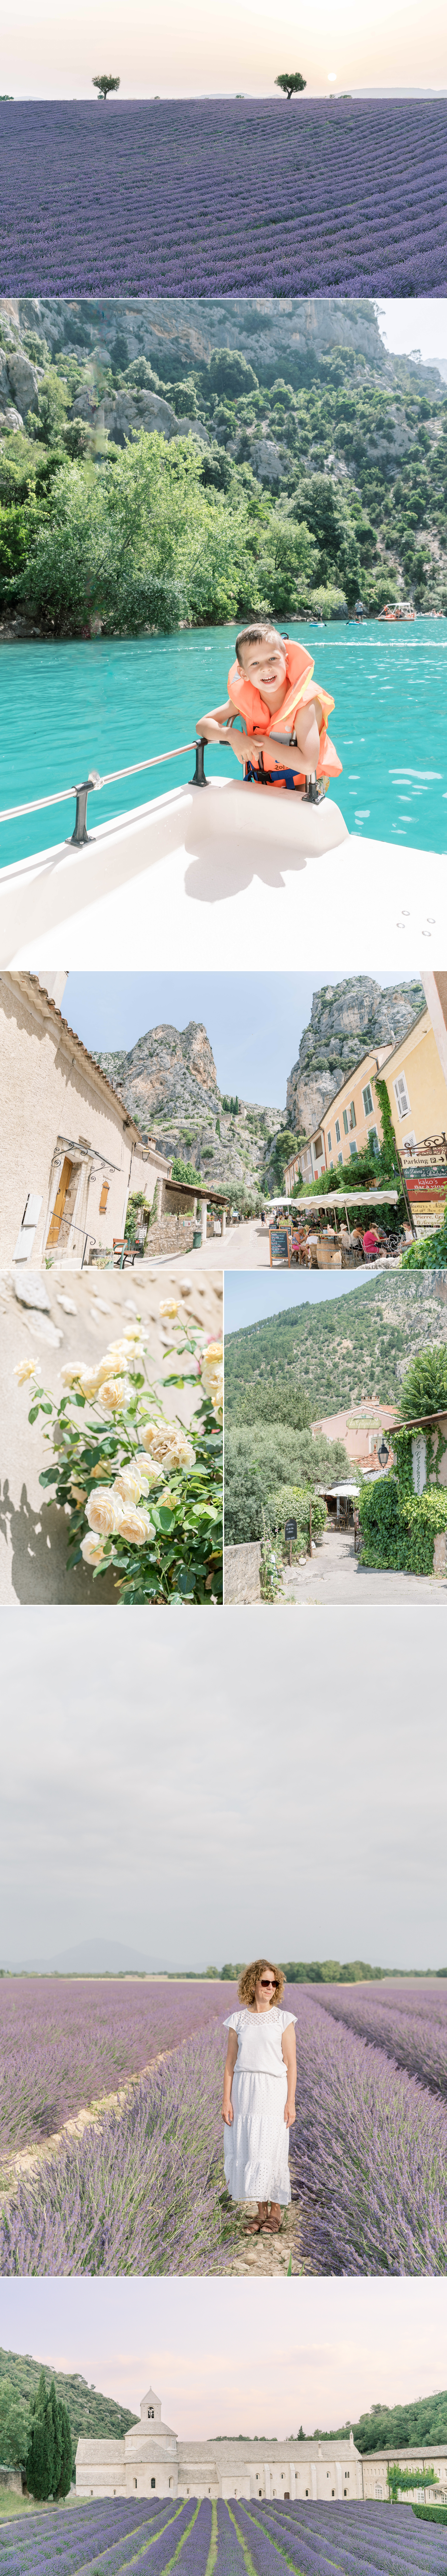 Gorgeous travel photography from a recent trip to France, including stops in both Provence for lavender season and Paris.